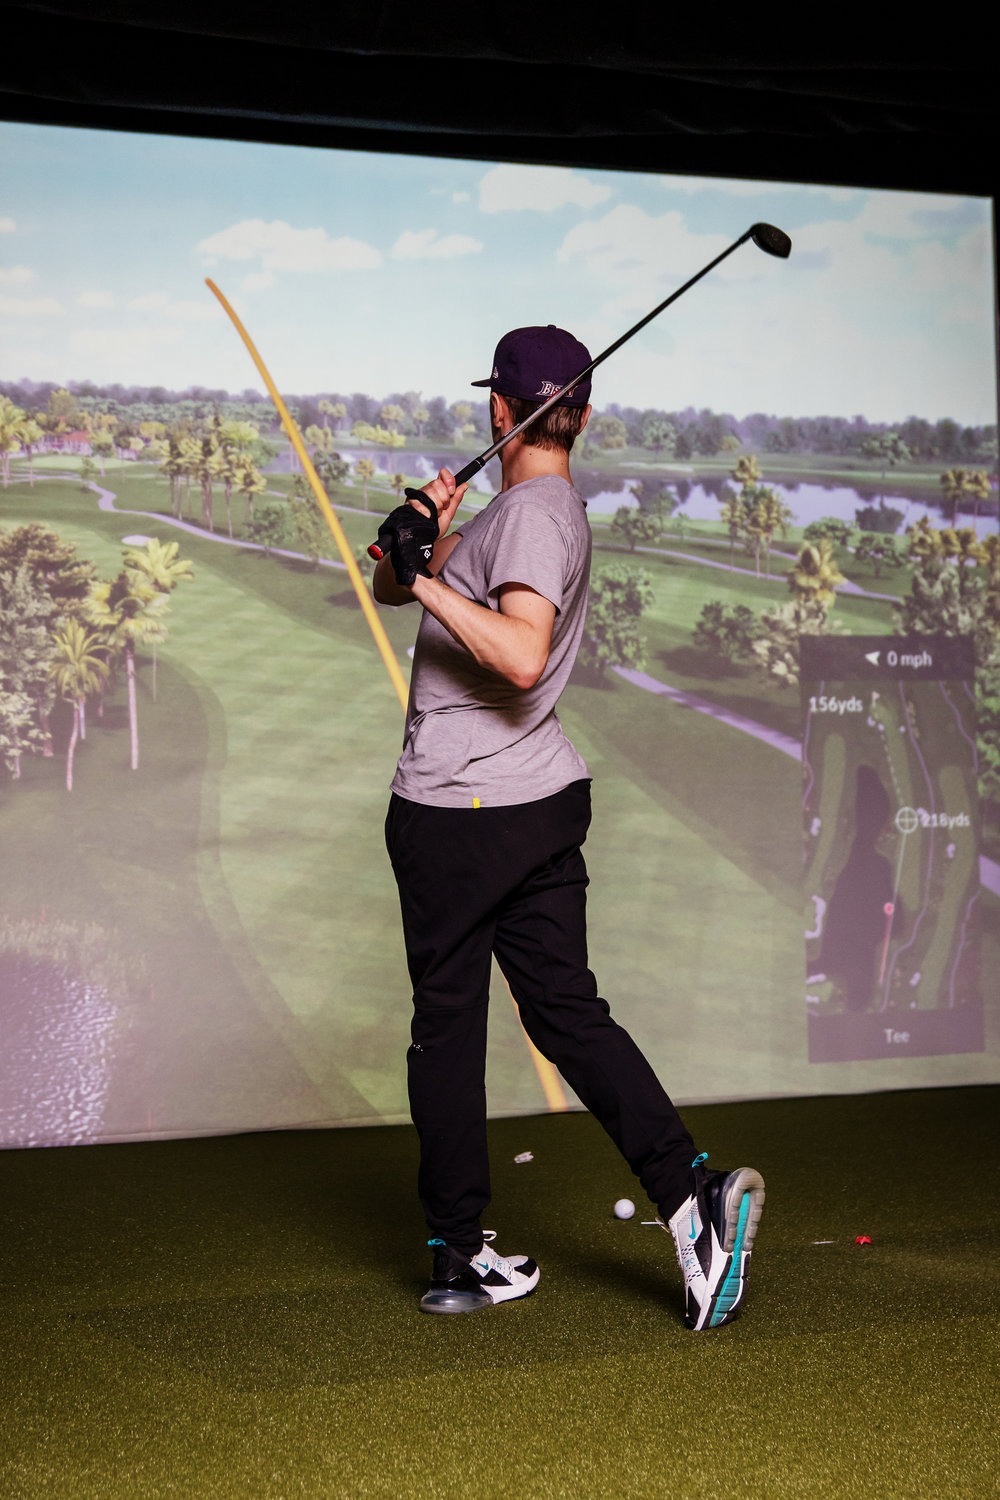 The Trackman 4 simulates famous courses from around the globe, the same tech pro golfers use